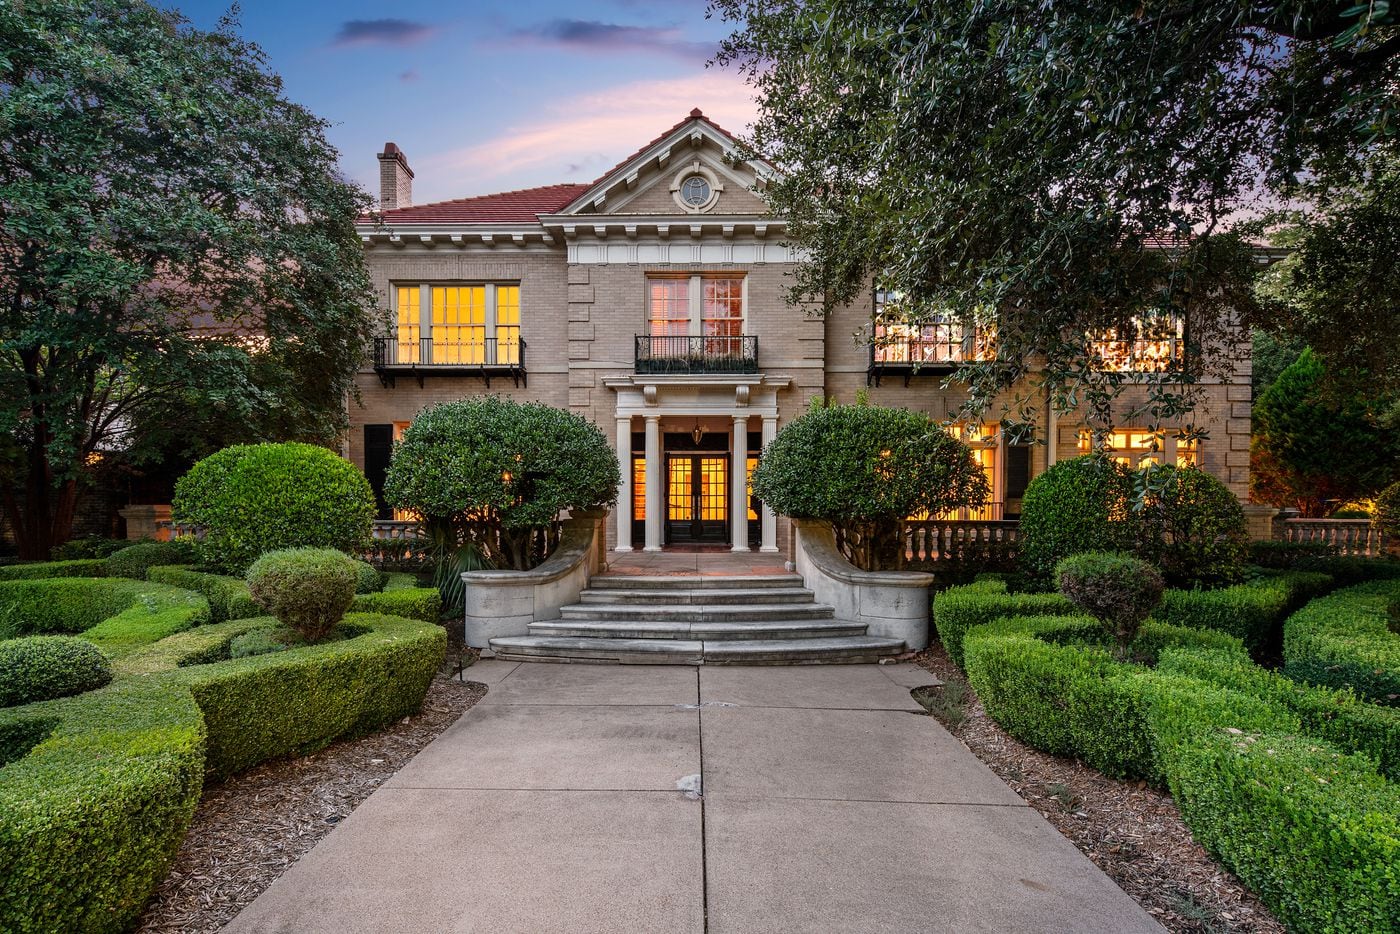 A look at the property on 5323 Swiss Avenue in Dallas, Texas.